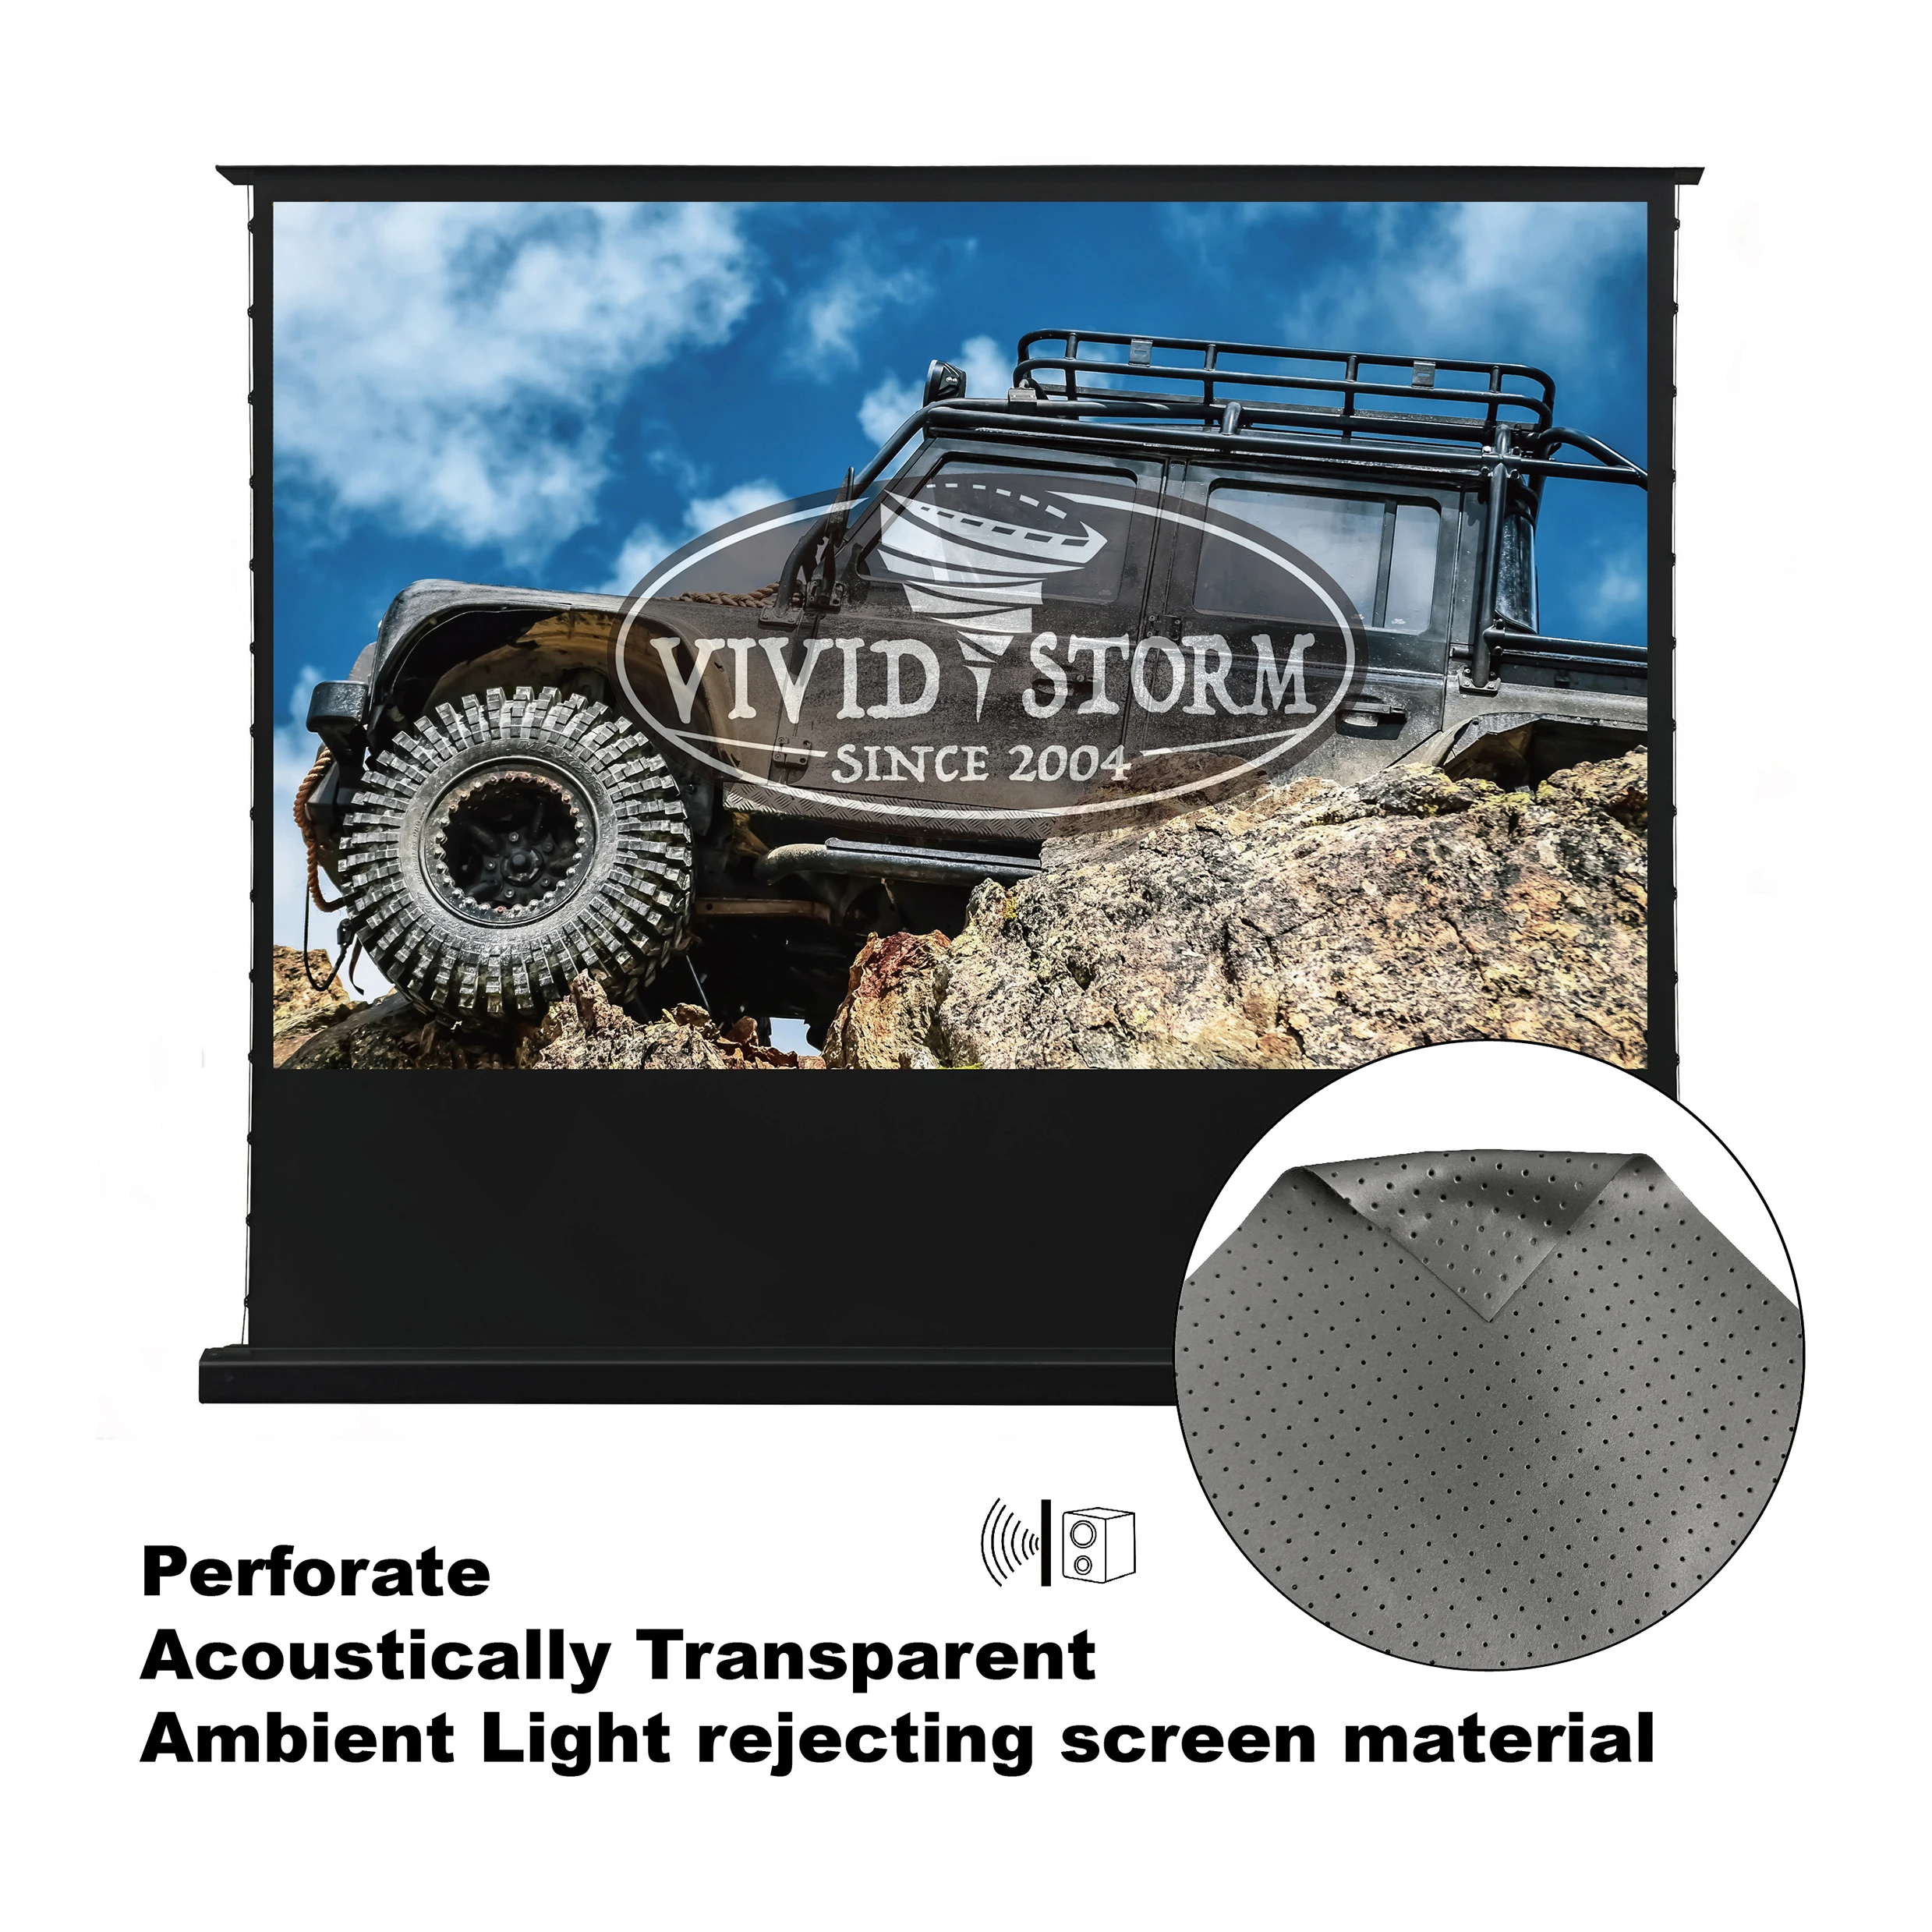 

VIVIDSTORM Electric tab-tensioned floor screen,Perforate Acoustically Transparent ALR material,120-inch,16:9,with ,VMDSTPALR120H